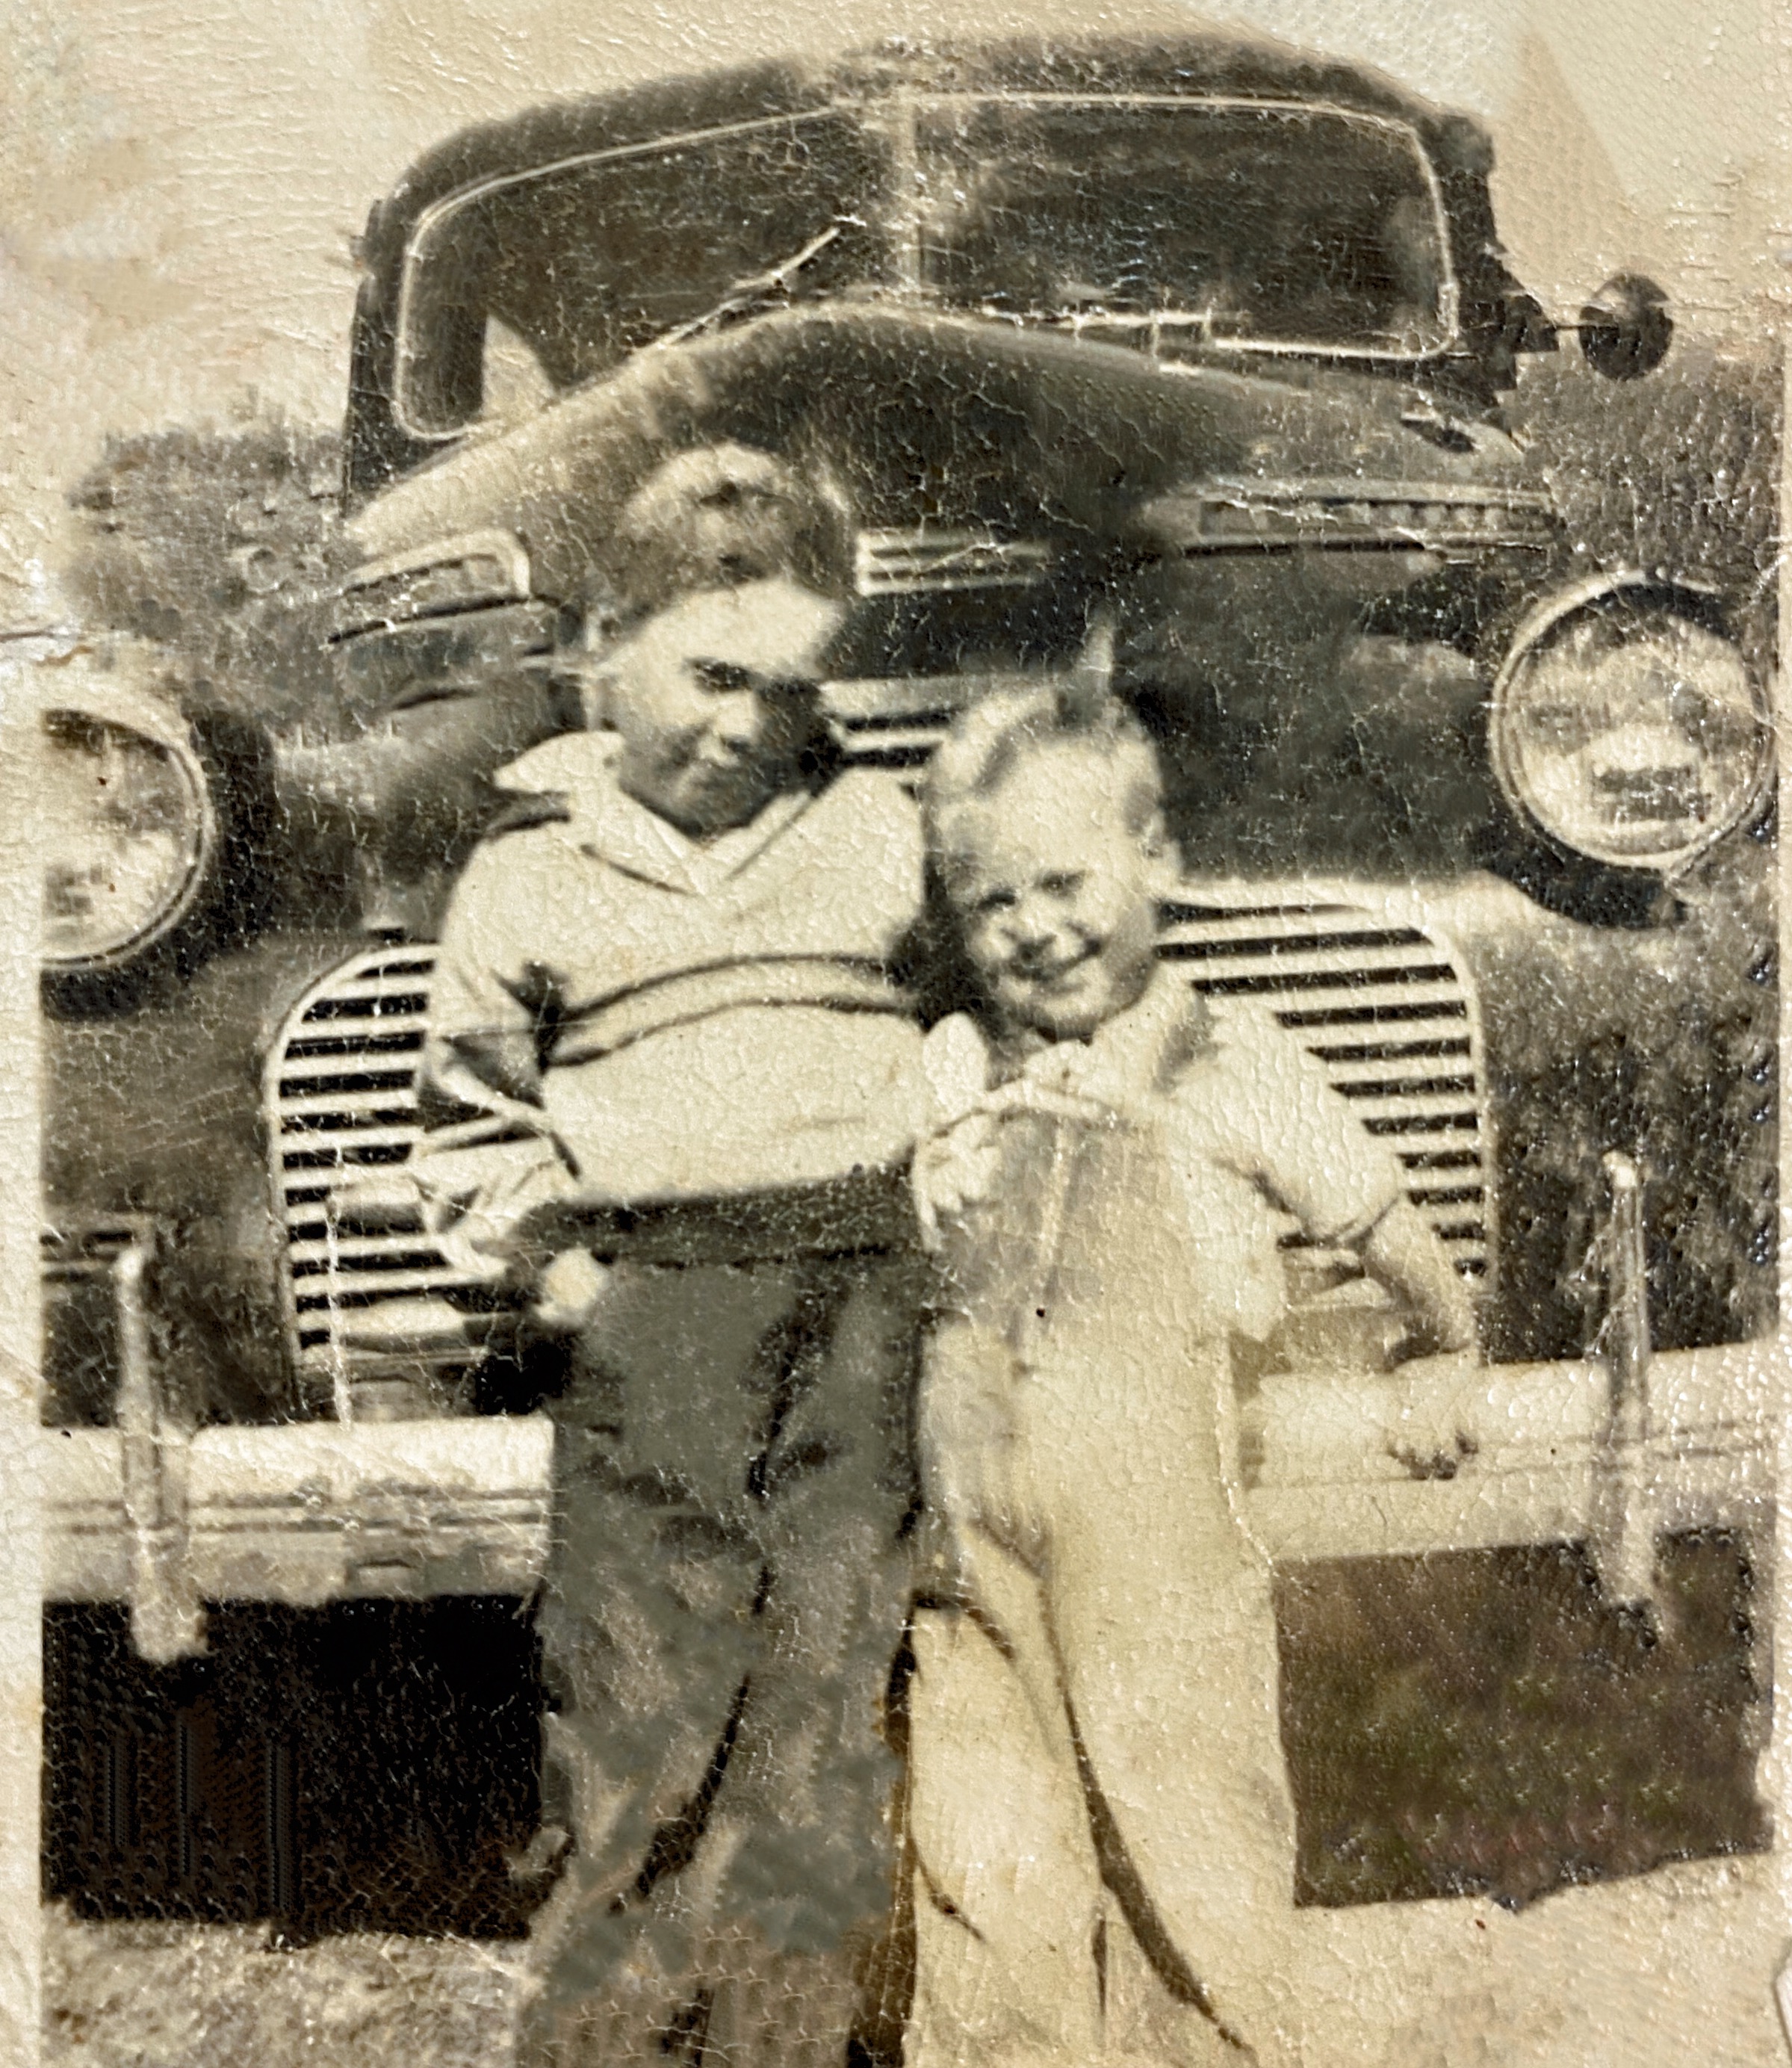 James Everette and Charles Ray Jones
About 1950